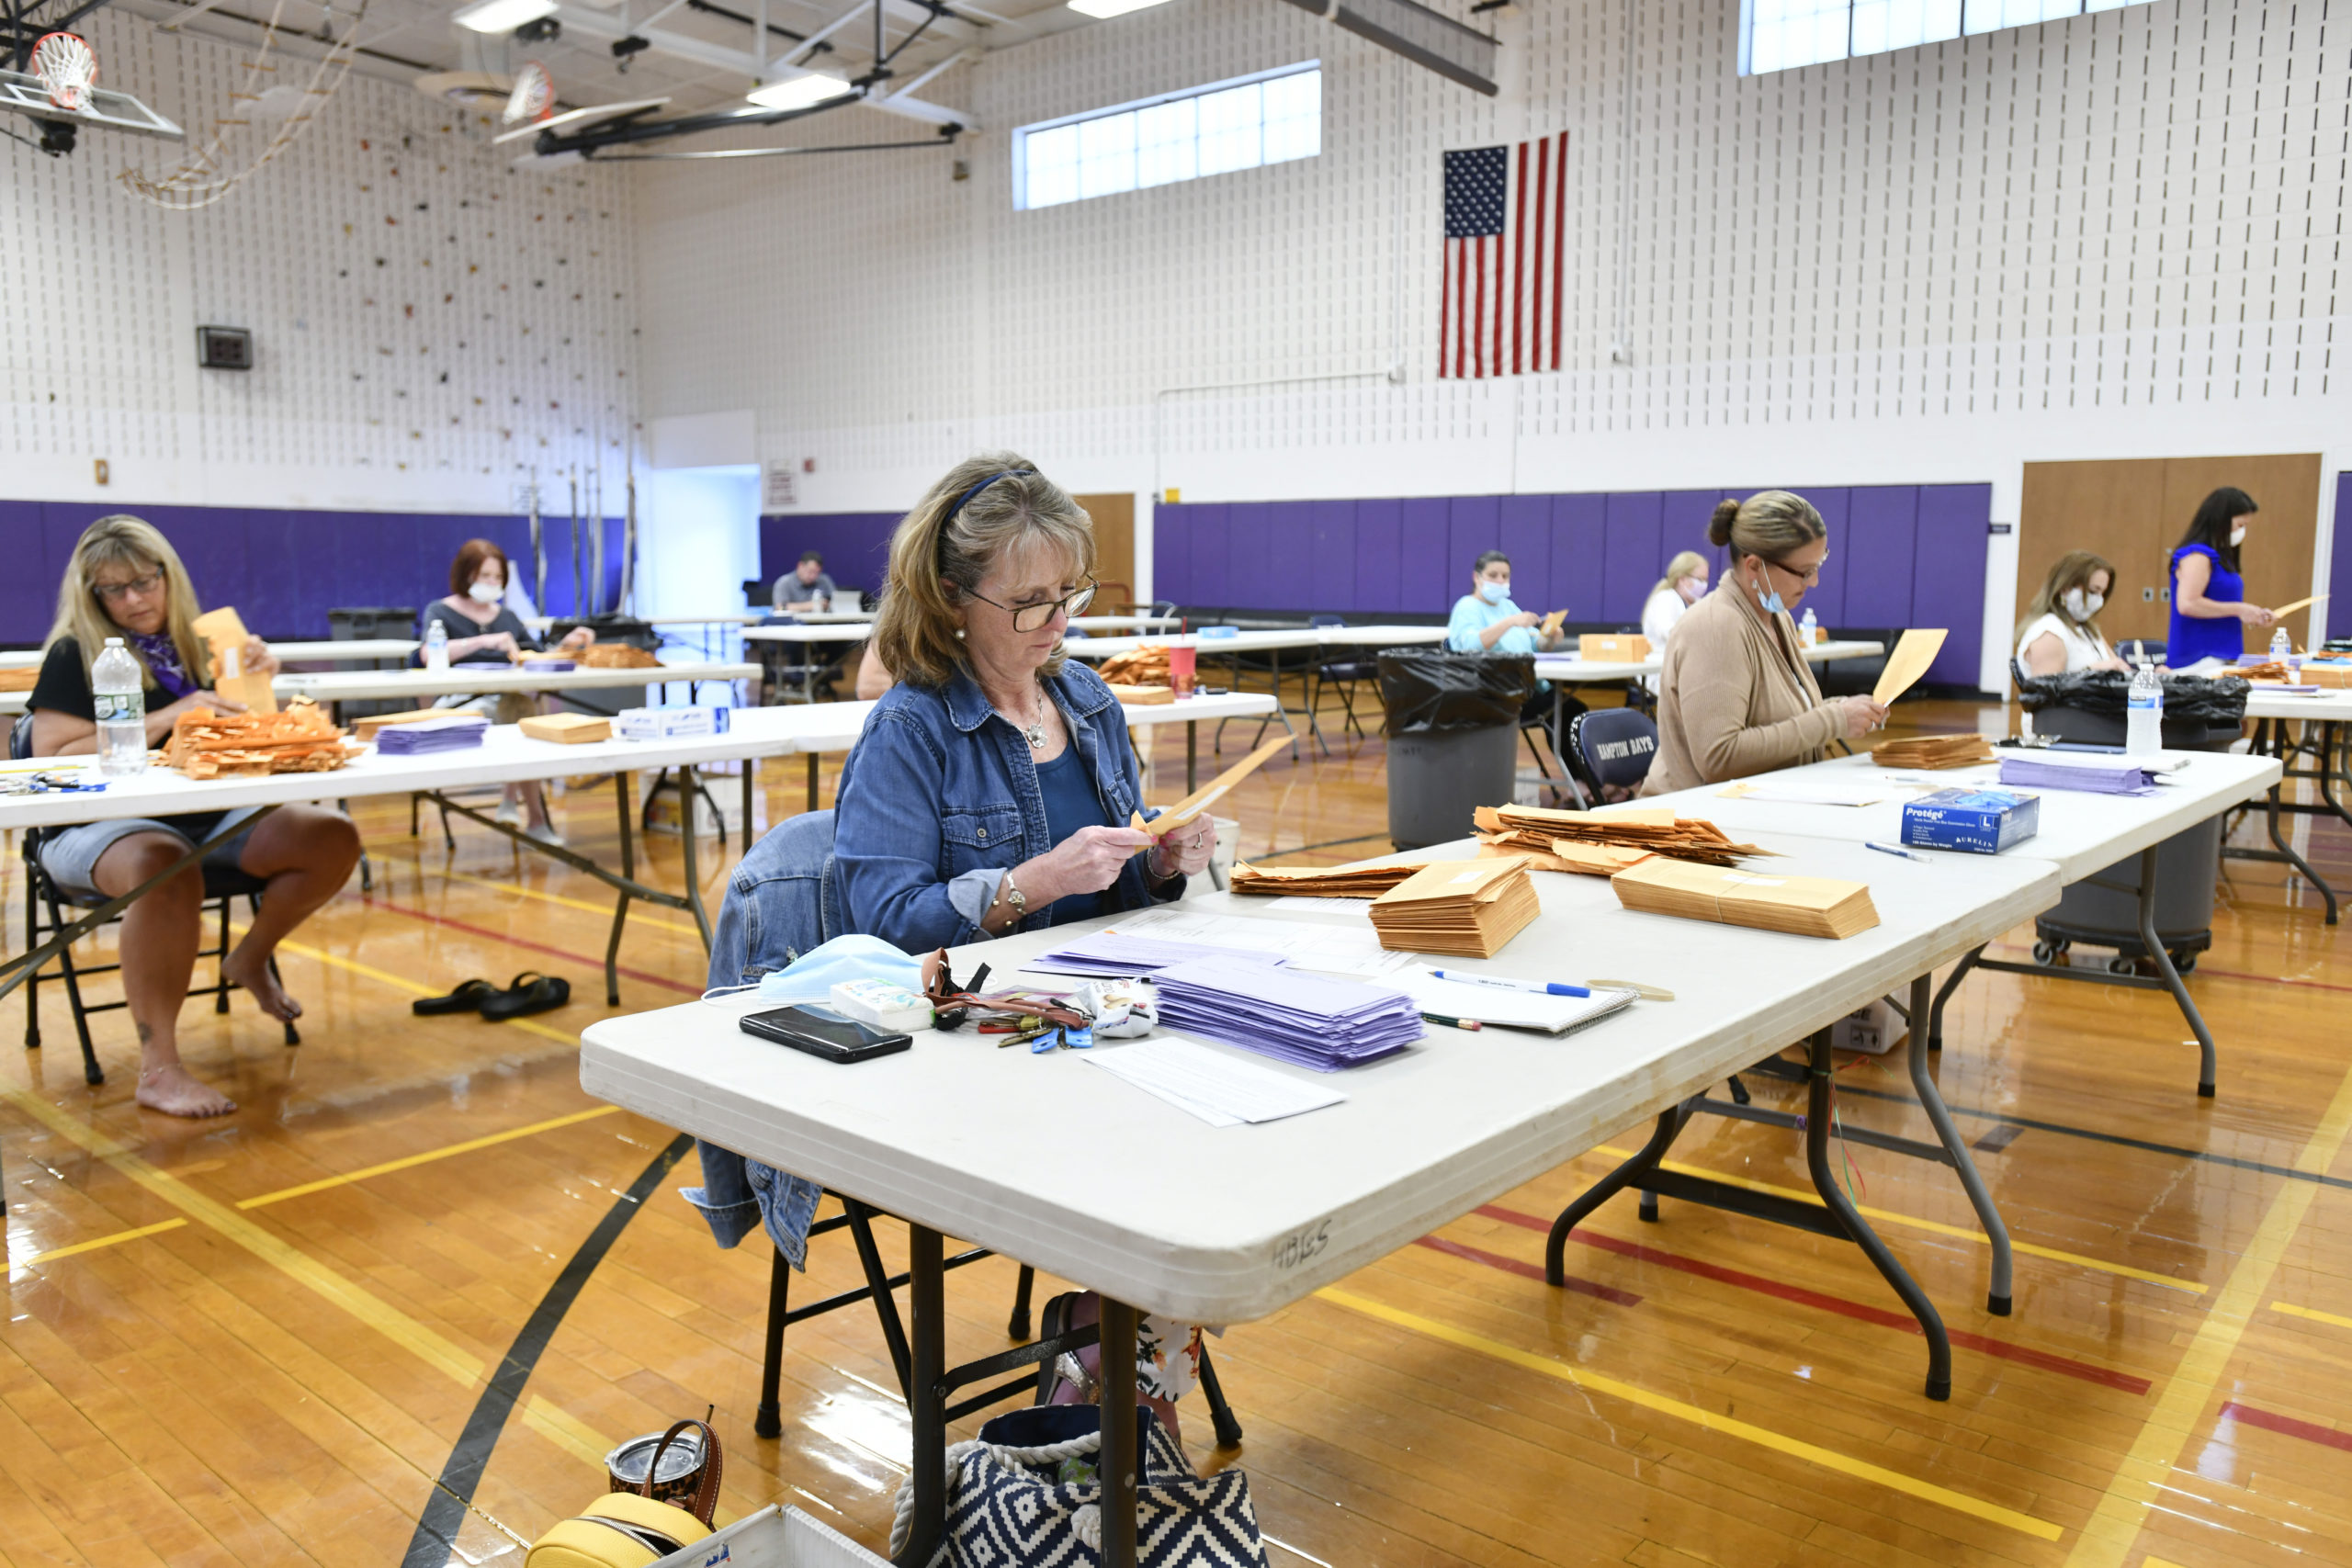 Ballots are opened and counted at Hampton Bays High School on Tuesday.  DANA SHAW